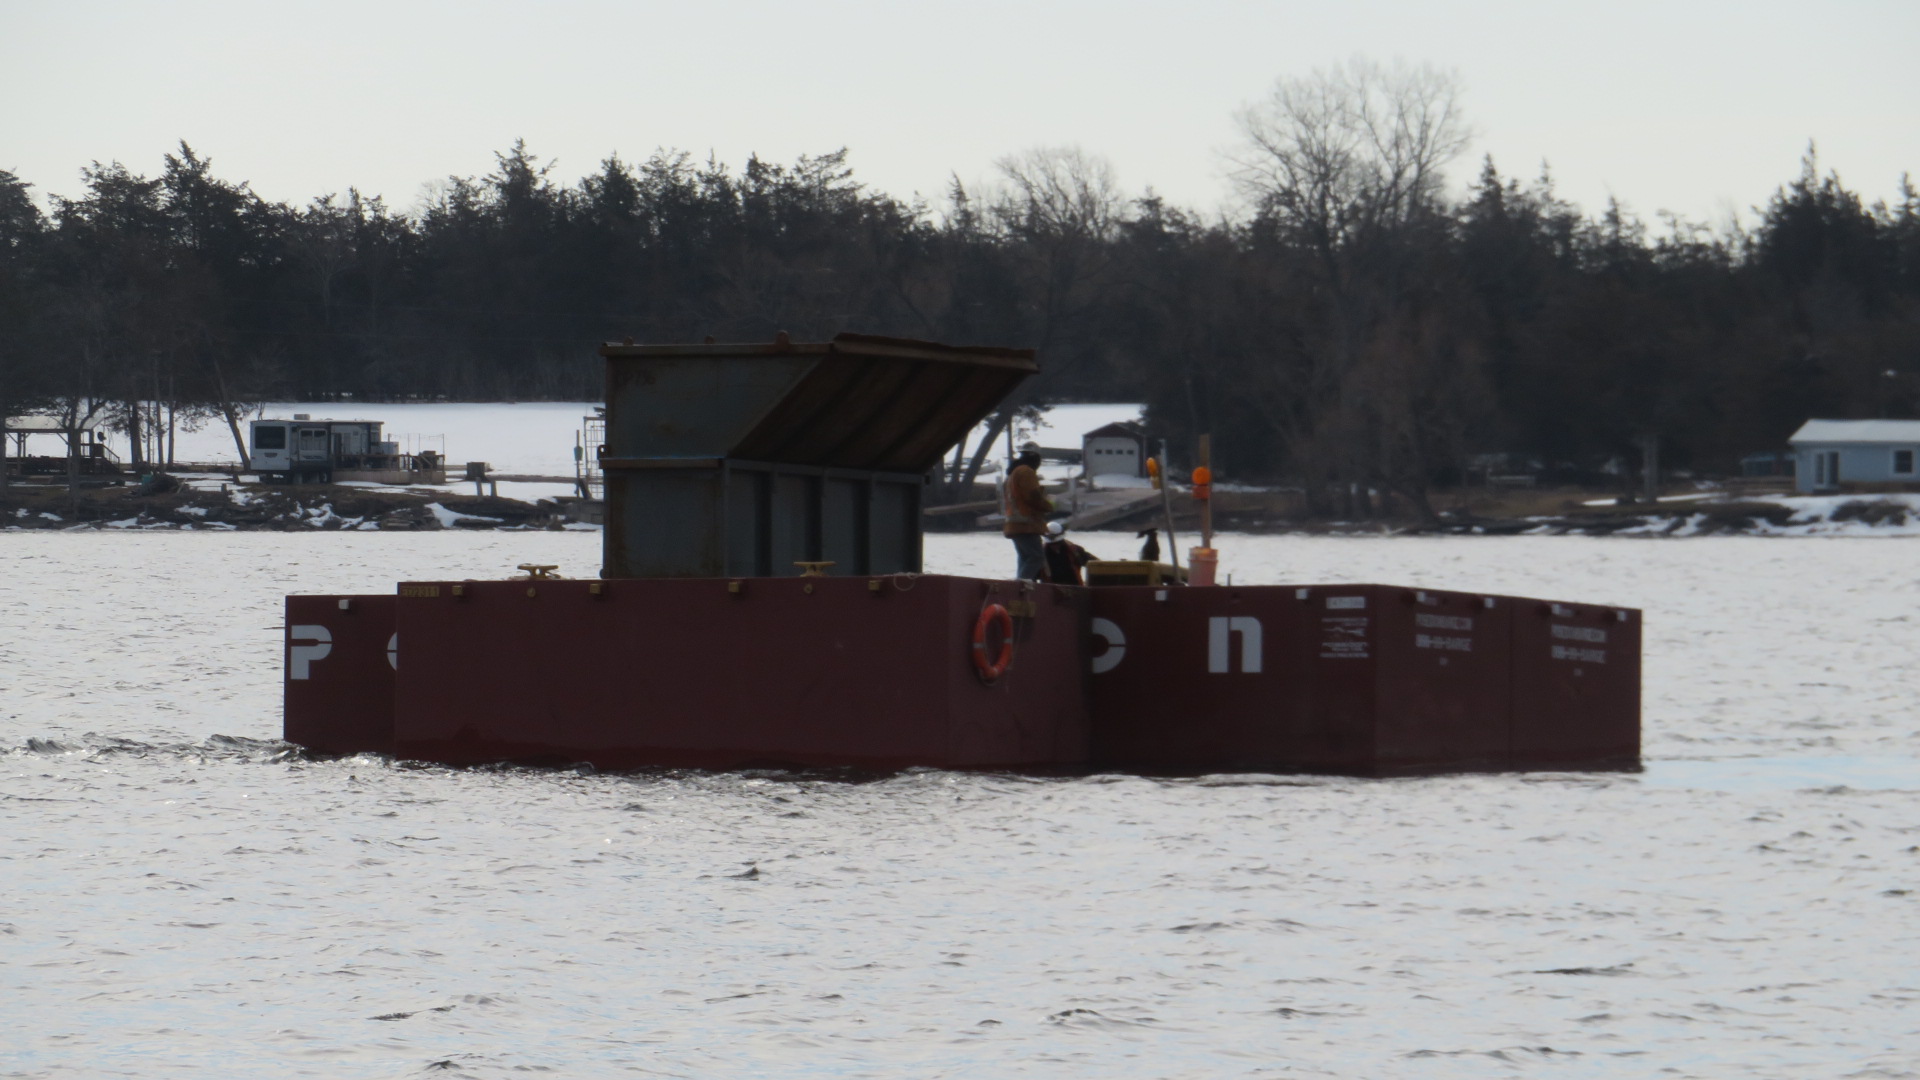 Moving the full containment bin to the shore on the barge